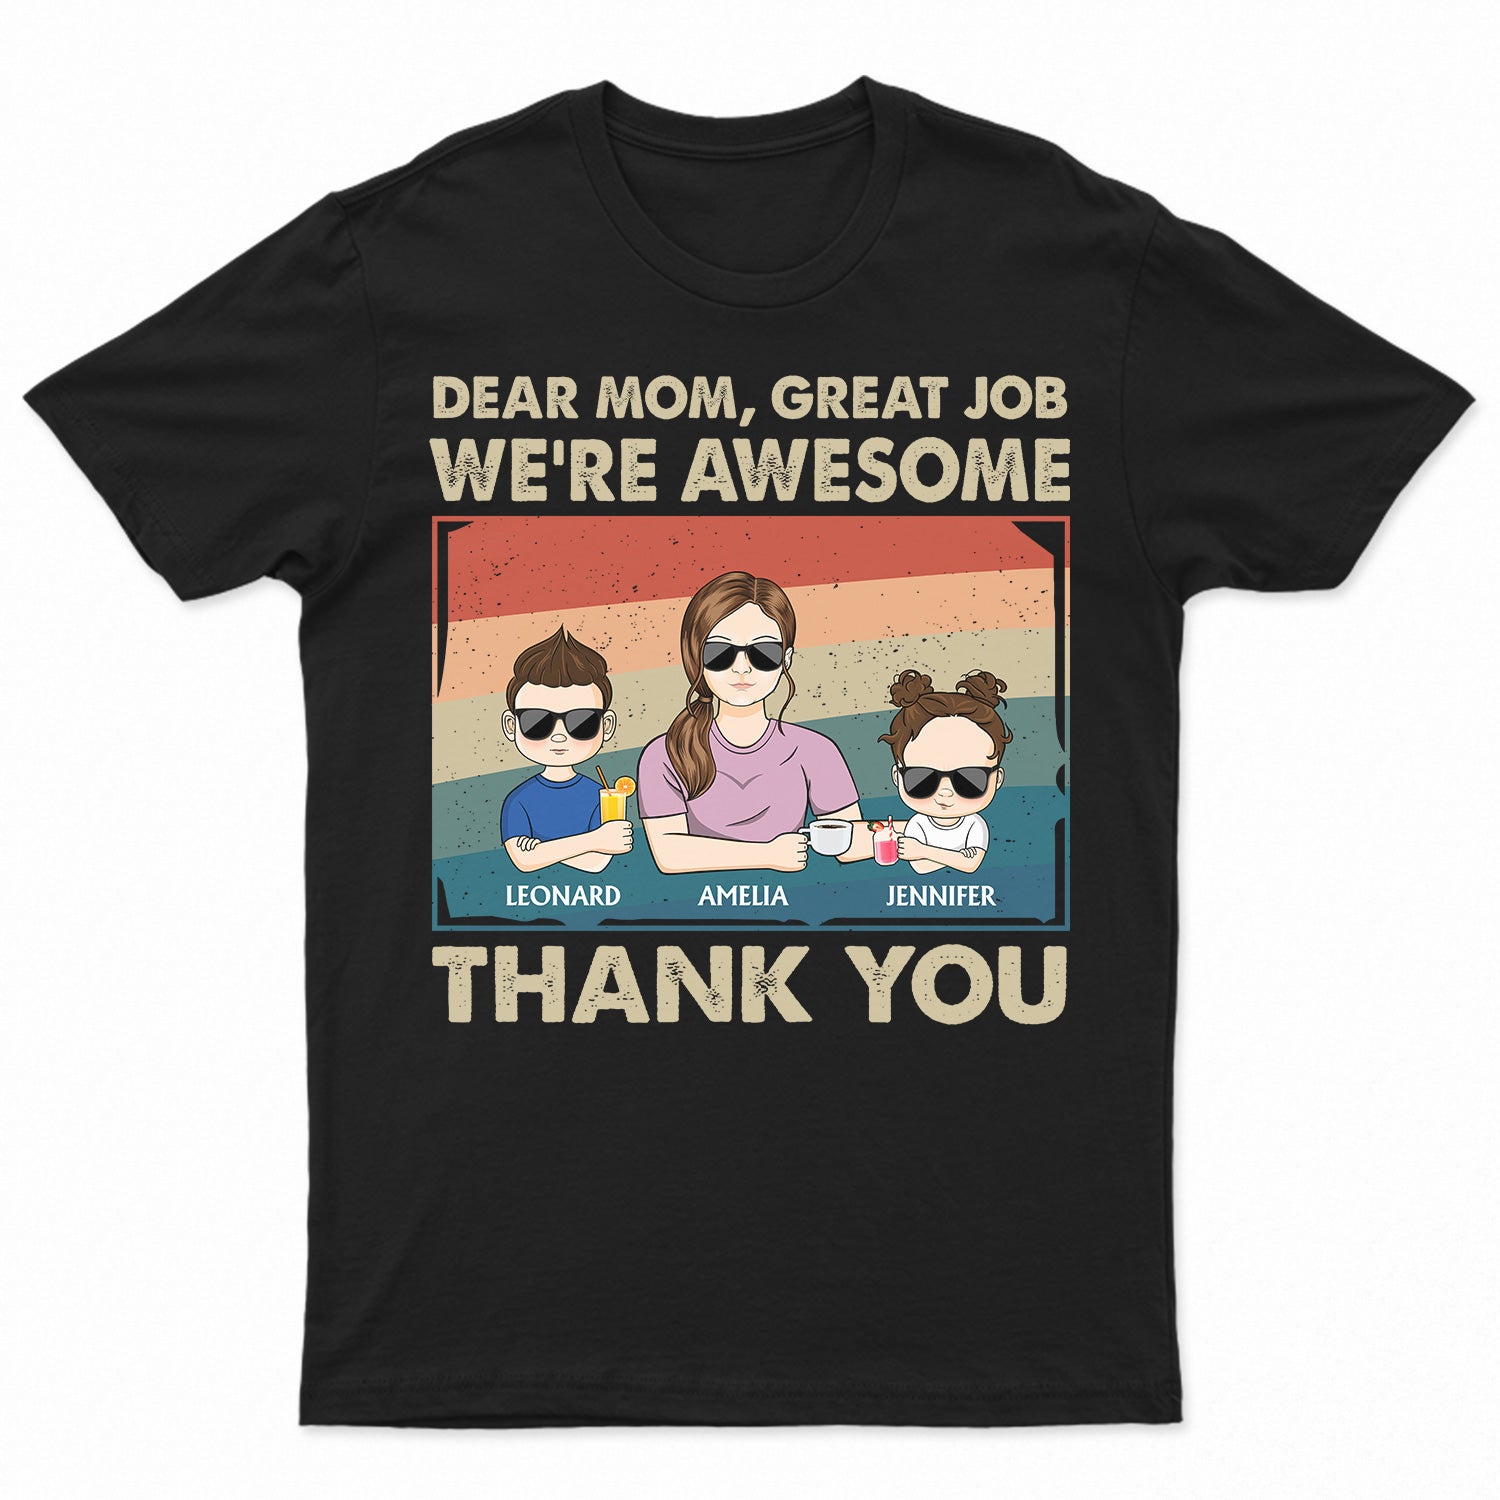 Great Job We're Awesome Thank You - Funny Gift For Mom, Mother, Mama, Grandma - Personalized T Shirt